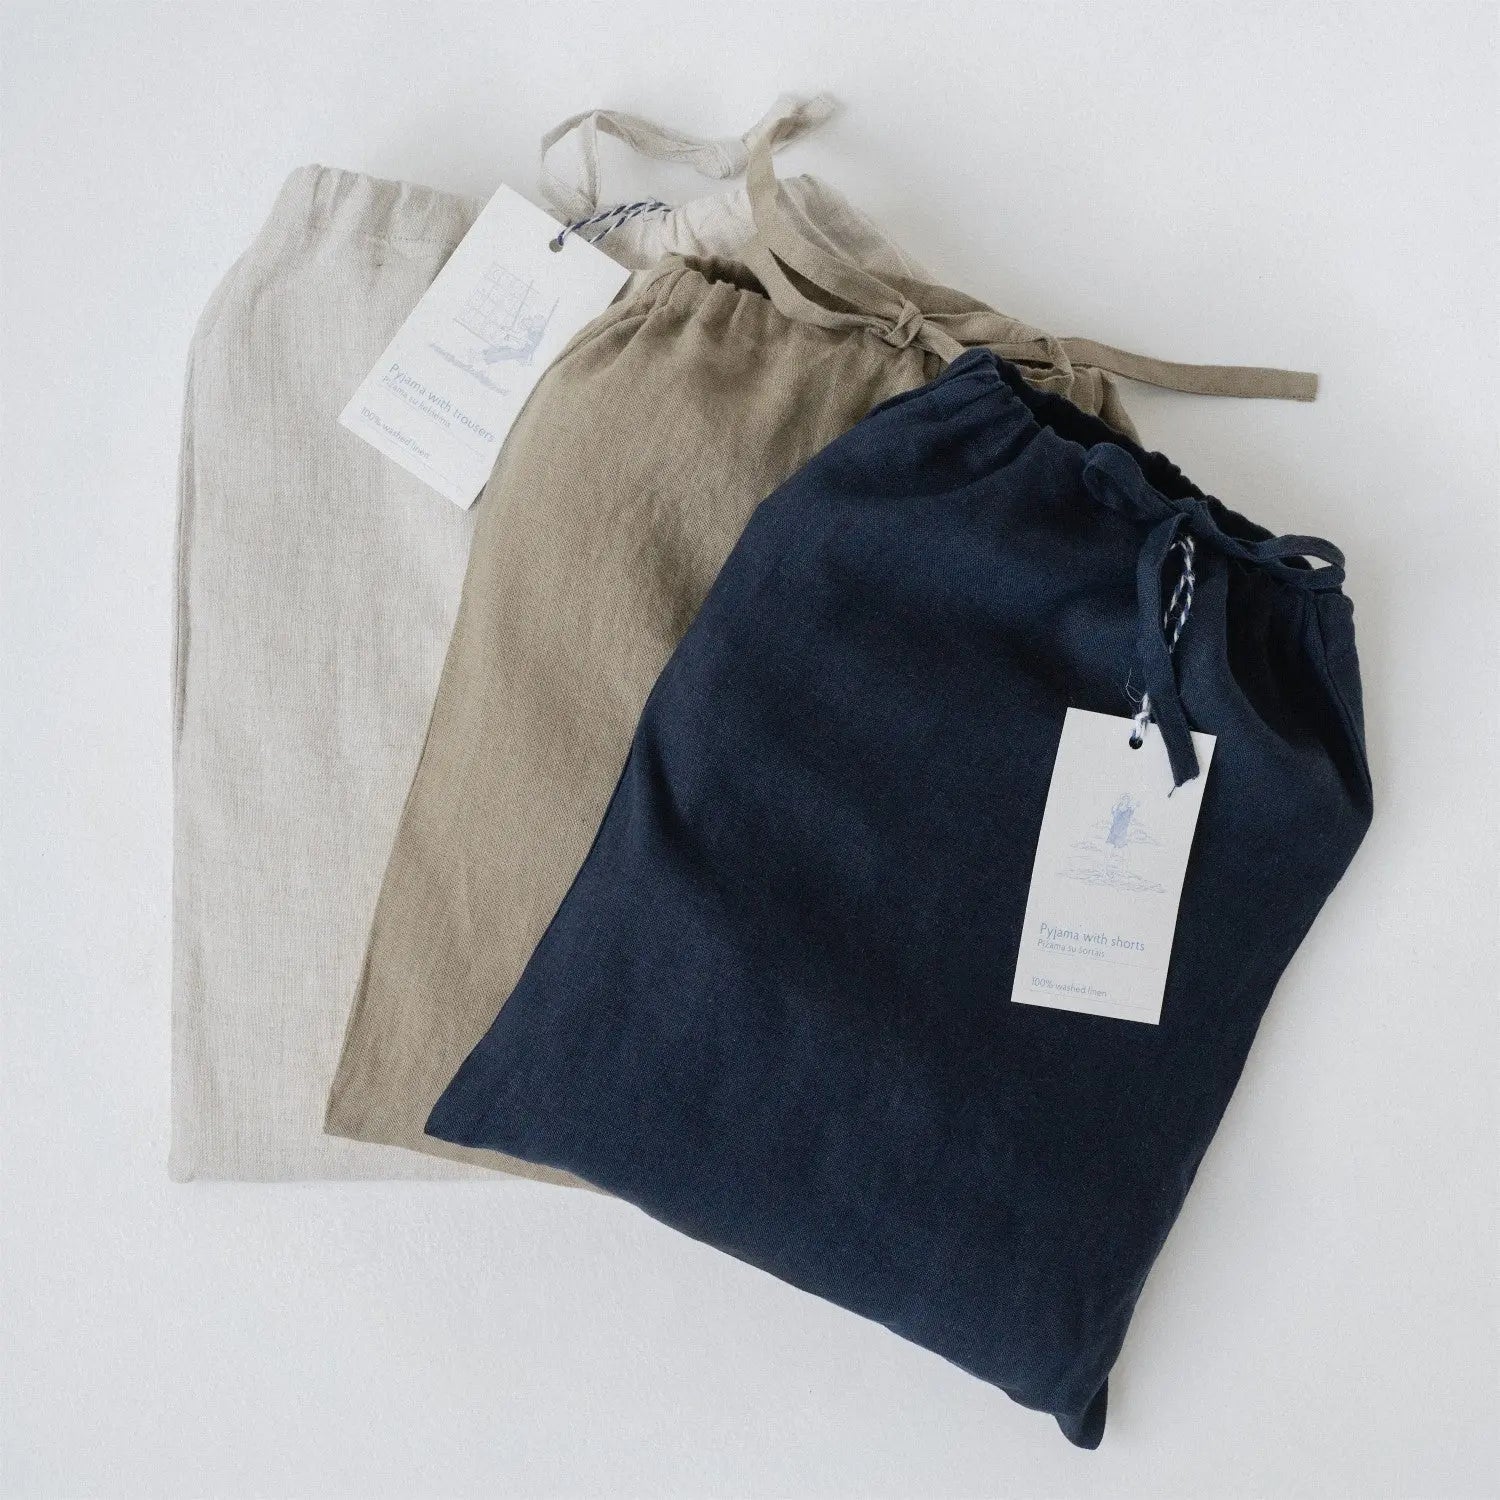 A group of linen Verbena pyjama sets in a linen bag, featuring a relaxed fit, sleeveless top, and trousers with an elastic waistband and slanted pockets. Handmade from 100% OEKO-TEX certified linen.